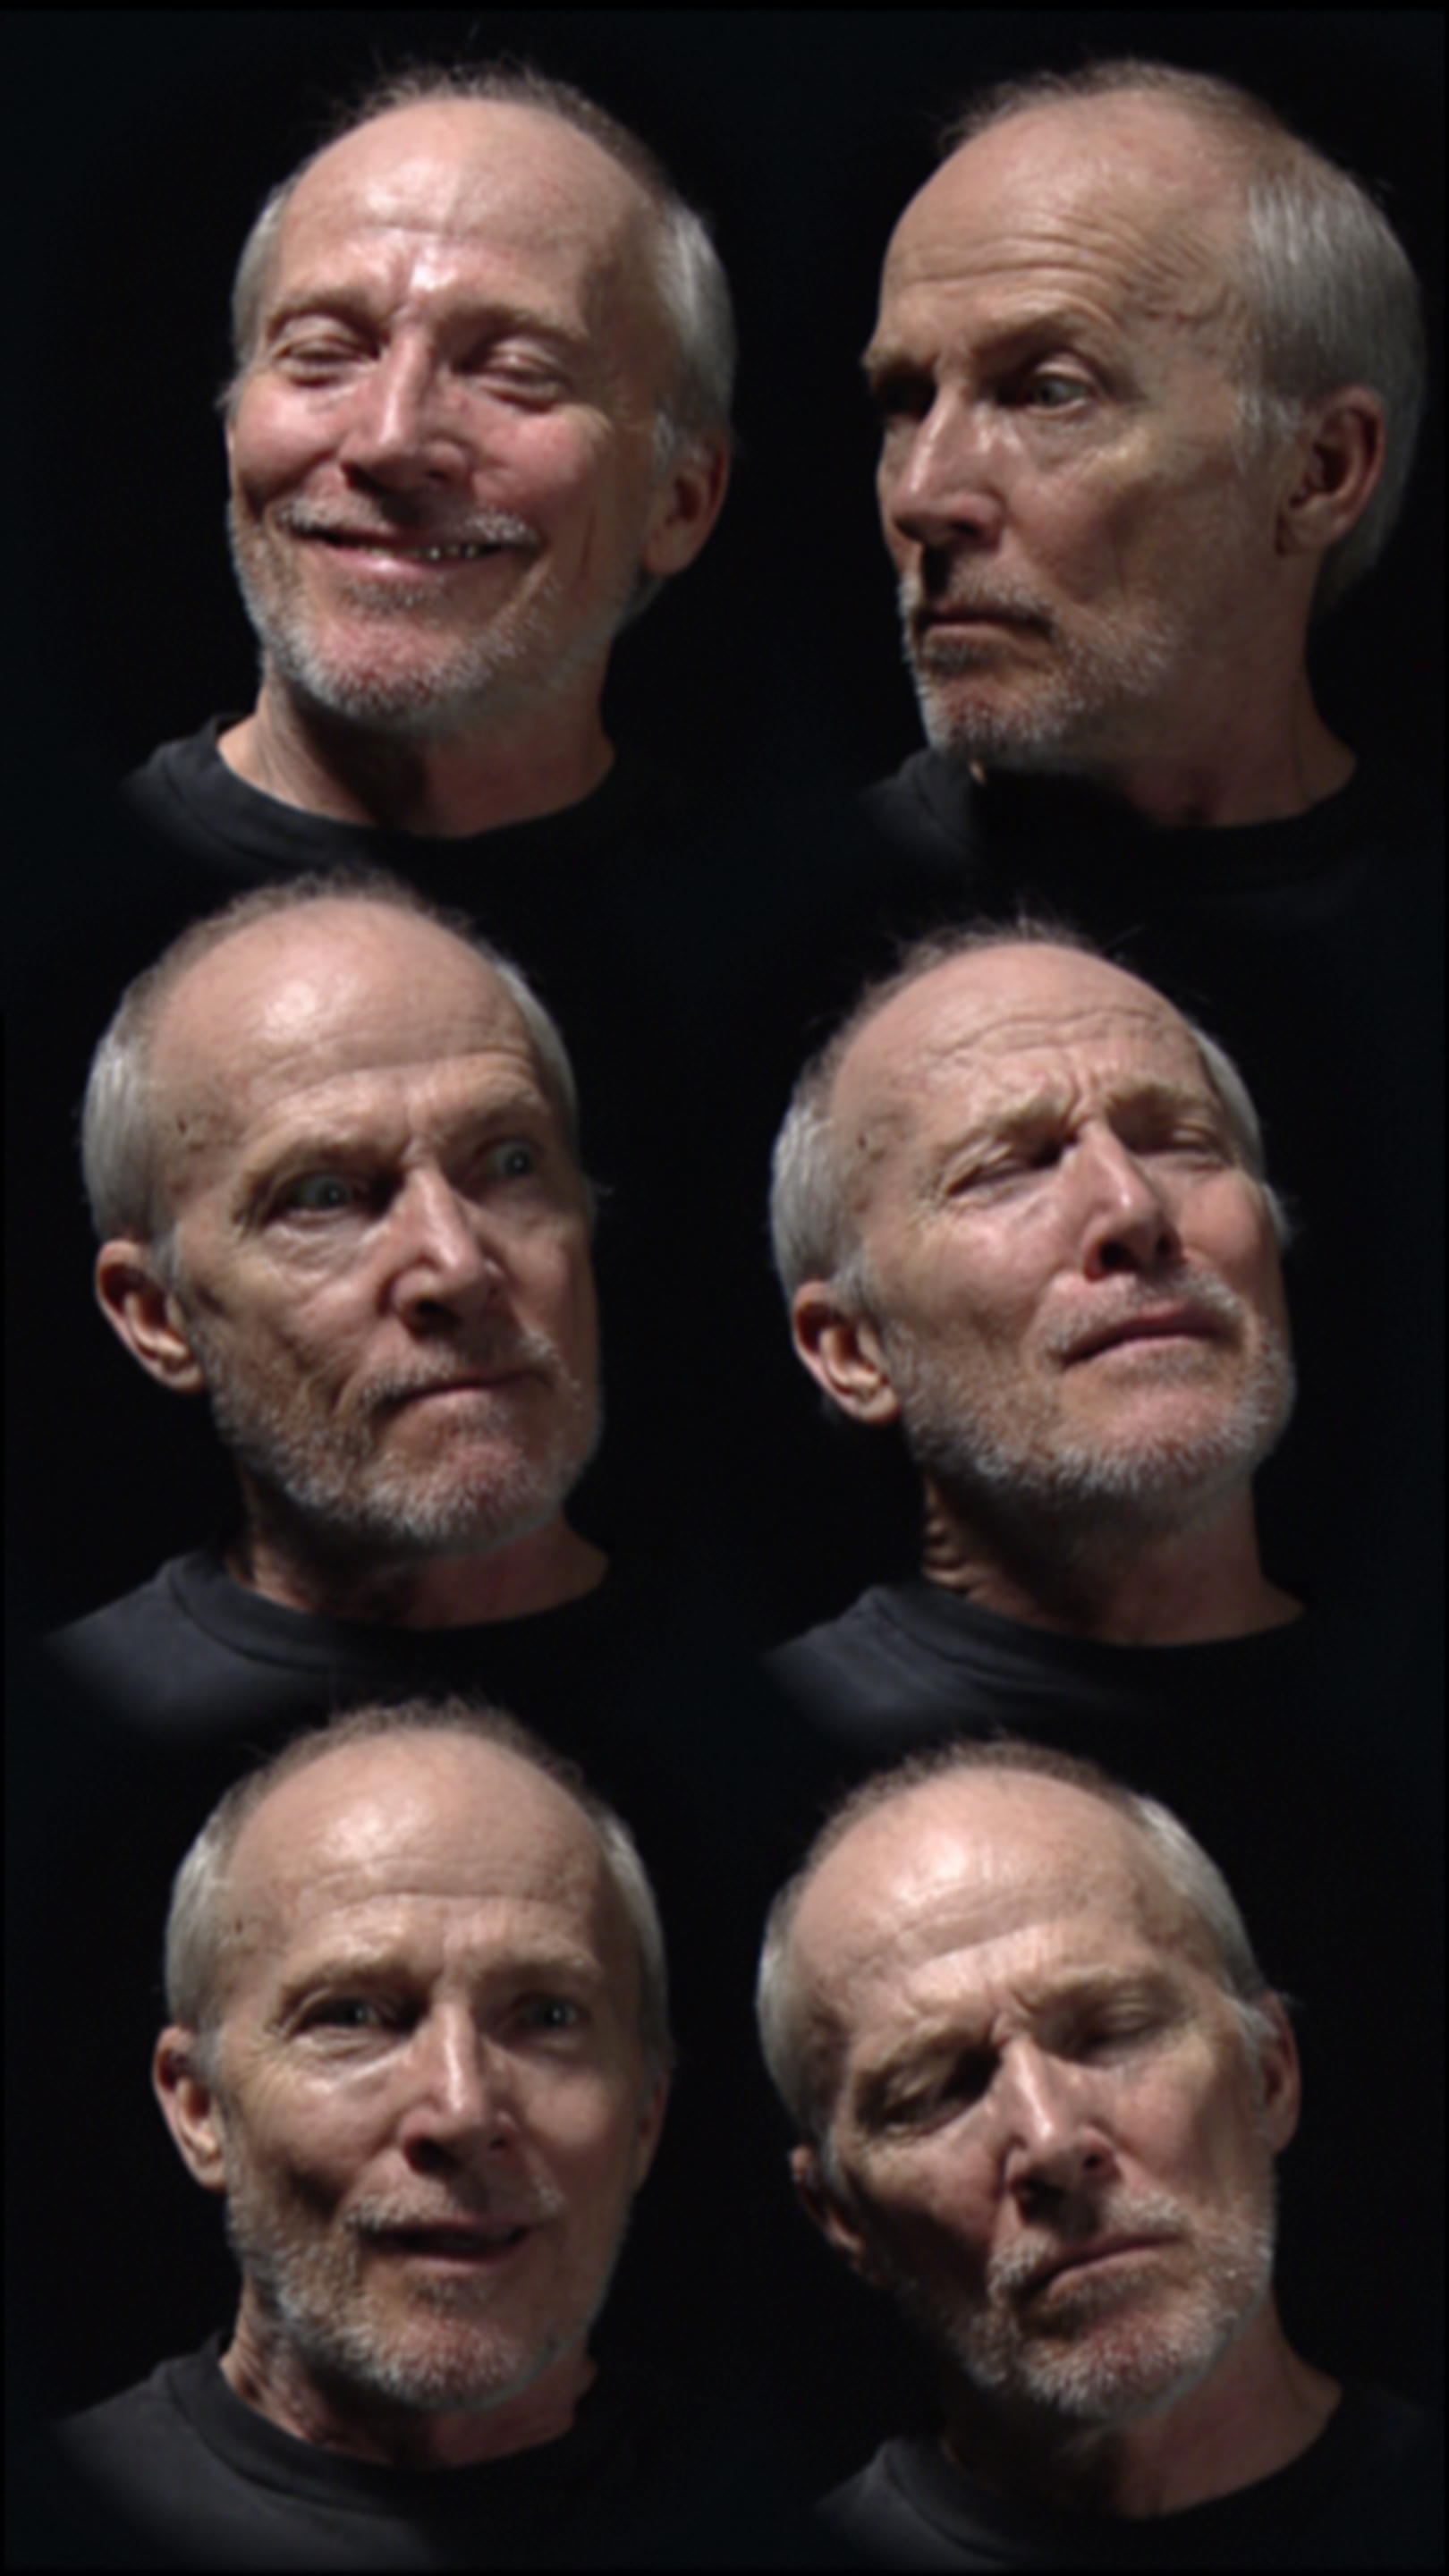 A long vertical digital screen showing the same 6 faces of an old man in different positions.